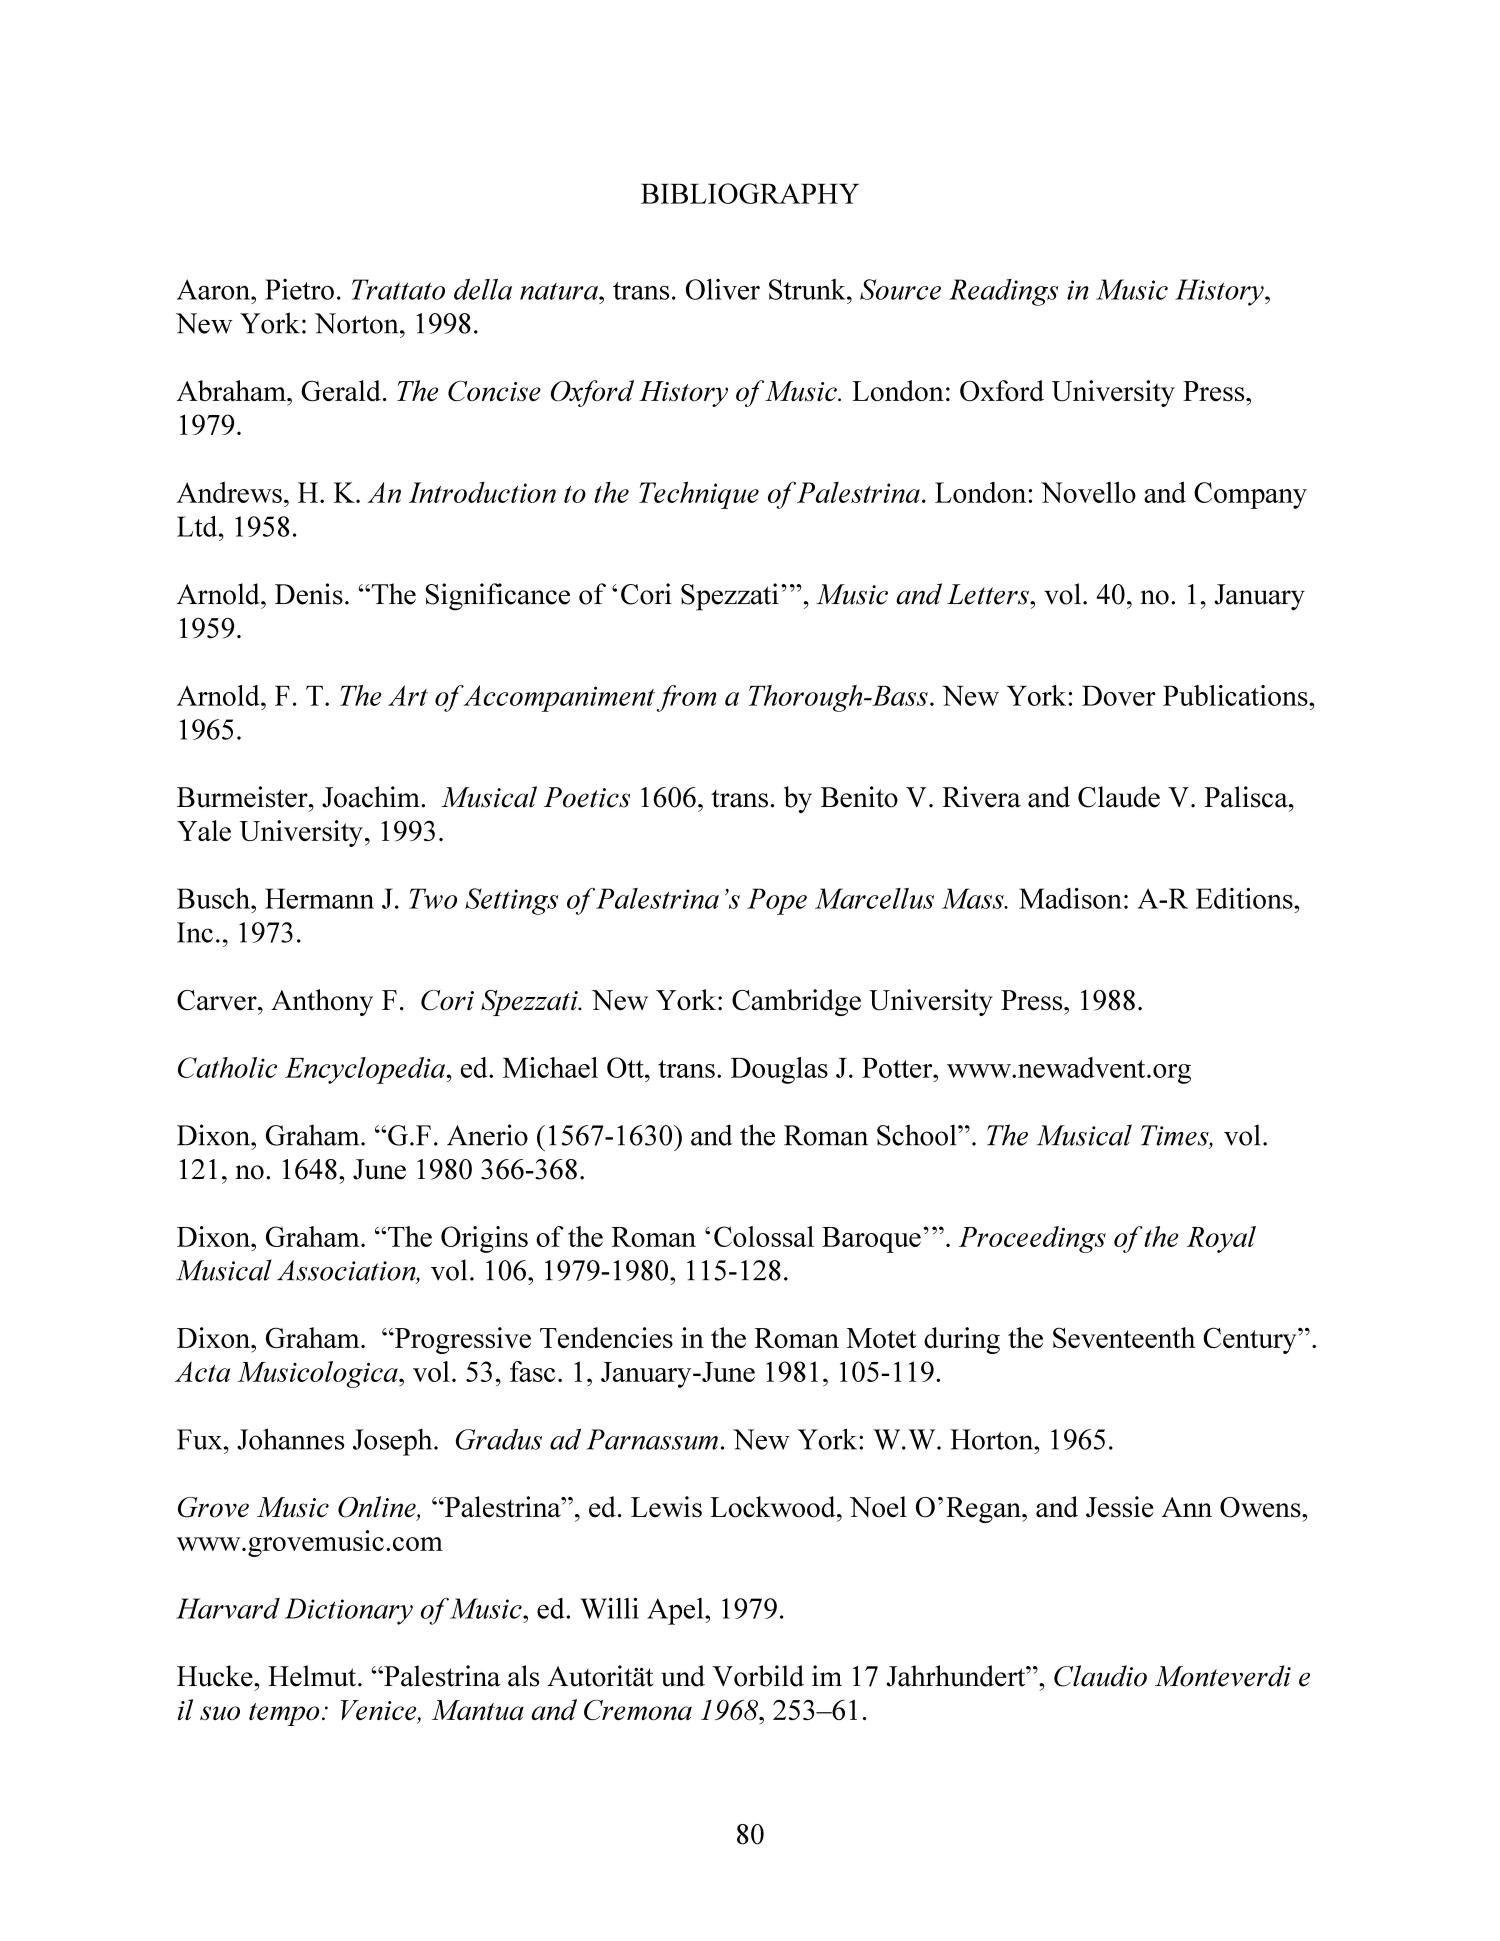 Missa Papae Marcelli: A Comparative Analysis of the Kyrie and Gloria Movements of Giovanni Pierluigi da Palestrina and an Adaptation by Giovanni Francesco Anerio
                                                
                                                    80
                                                